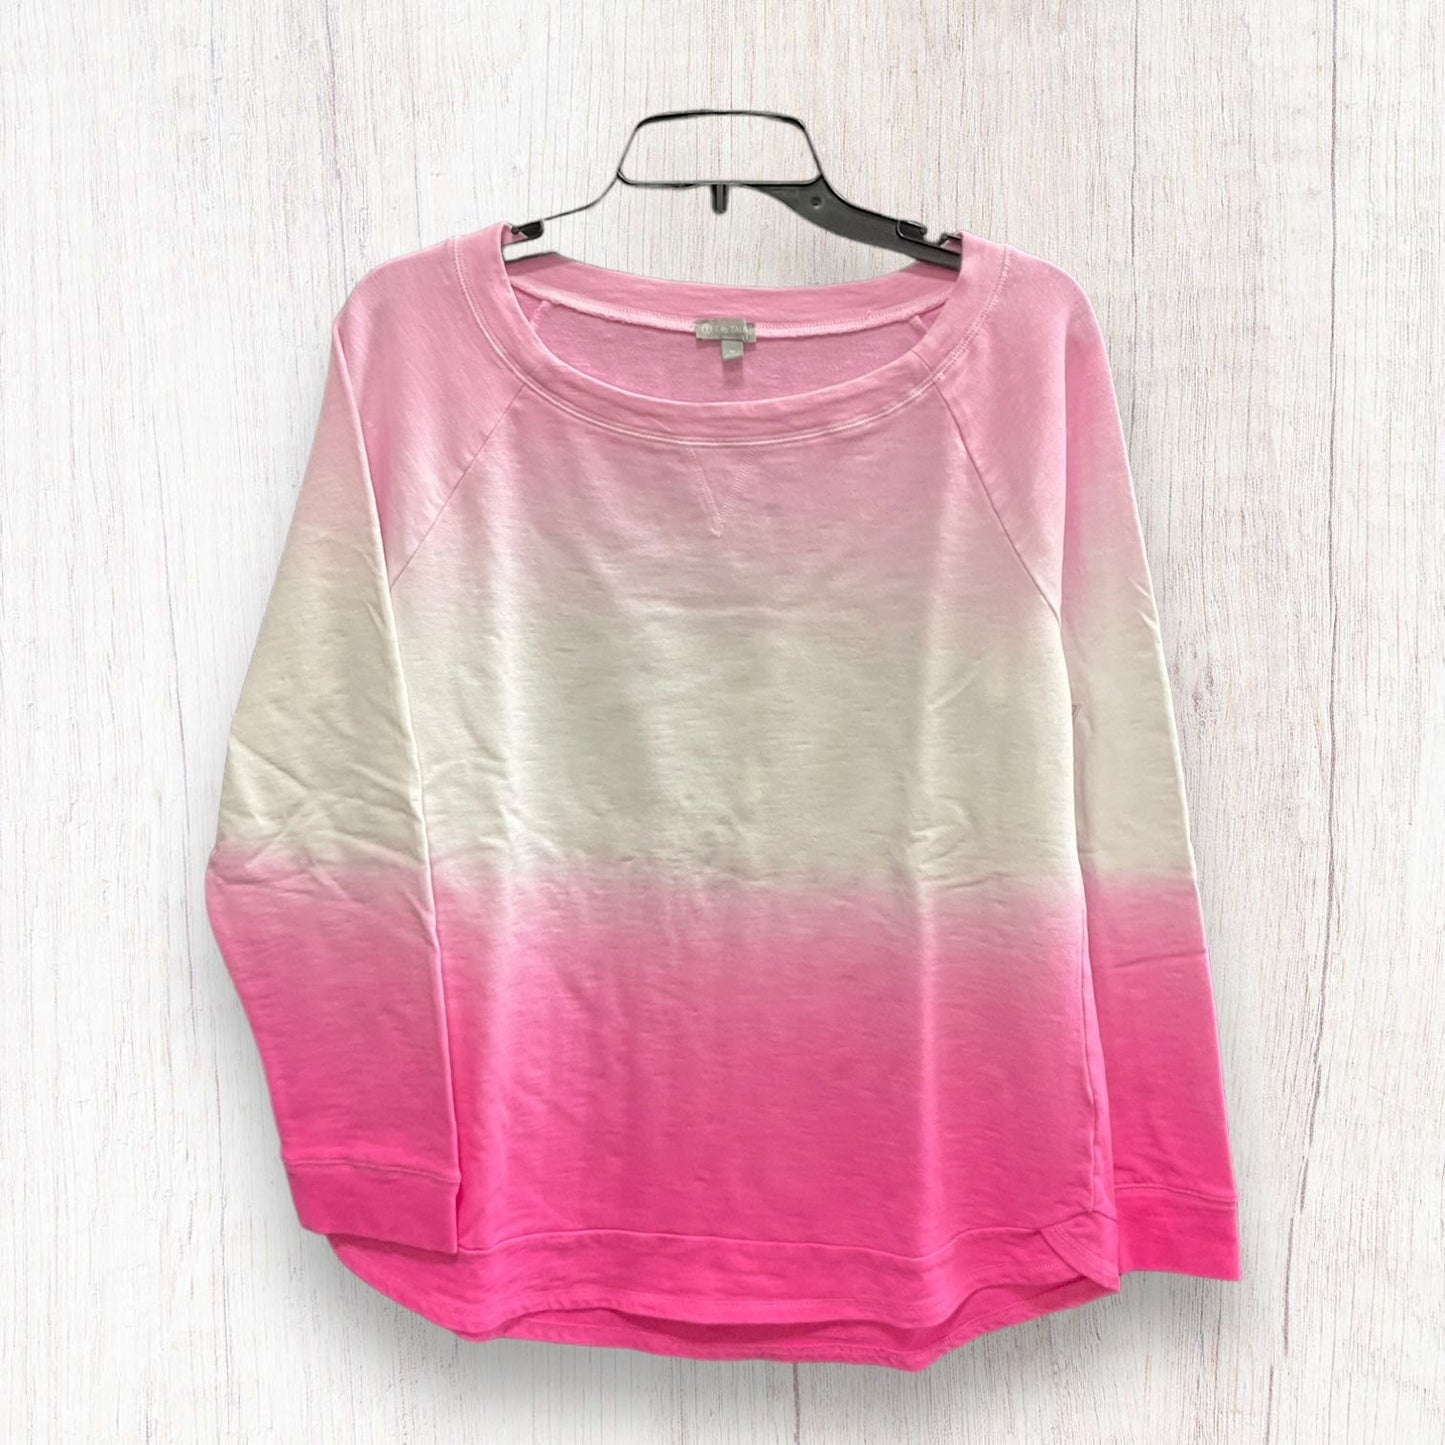 Pink & White Top Long Sleeve Talbots, Size M